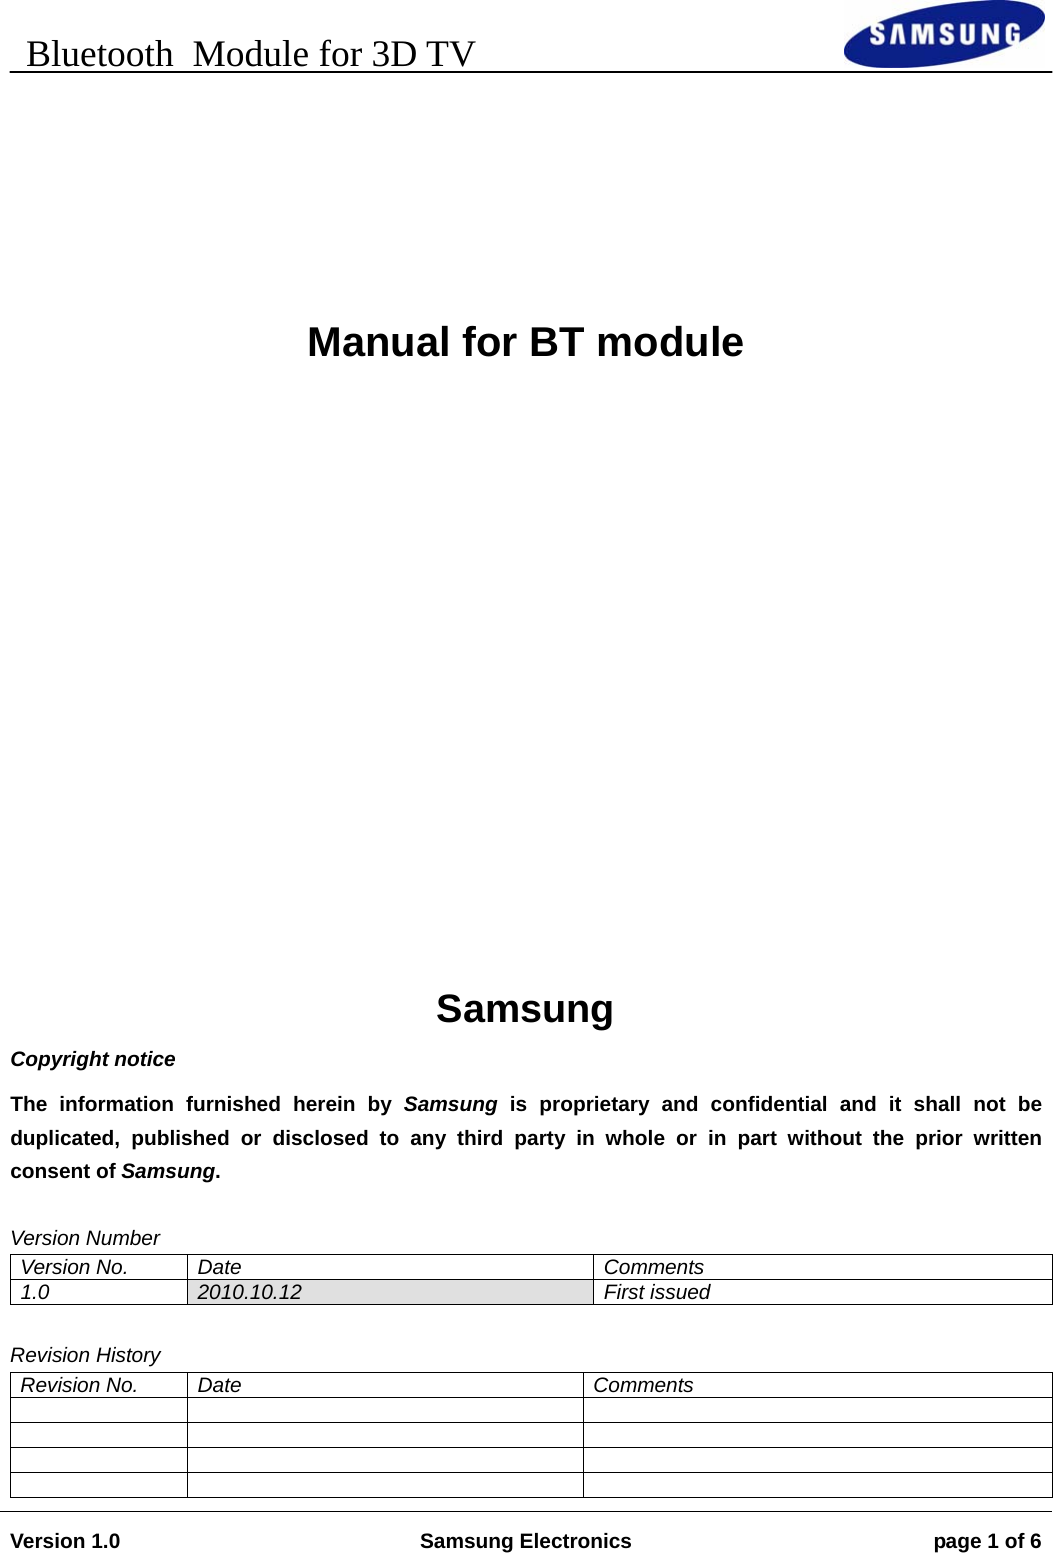    Bluetooth  Module for 3D TV                                                                        Version 1.0  Samsung Electronics  page 1 of 6          Manual for BT module          Samsung Copyright notice The information furnished herein by Samsung is proprietary and confidential and it shall not be duplicated, published or disclosed to any third party in whole or in part without the prior written consent of Samsung.  Version Number Version No.  Date  Comments 1.0  2010.10.12 First issued  Revision History Revision No.  Date  Comments                 